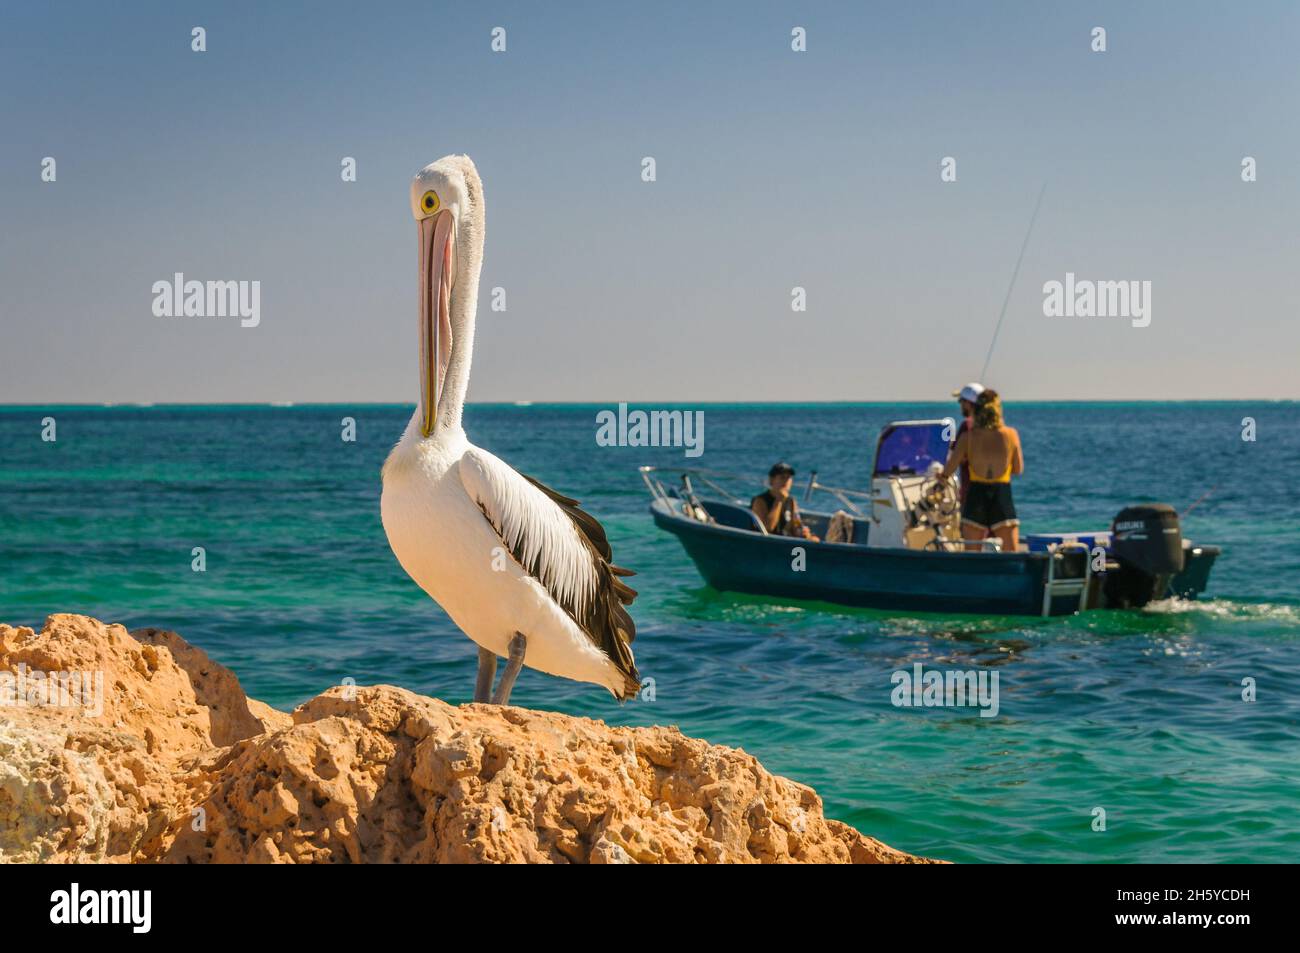 An Australian pelican stands on a rocky coastline grooming as three anglers pass in a motorized fishing boat at Coral Bay in Western Australia. Stock Photo